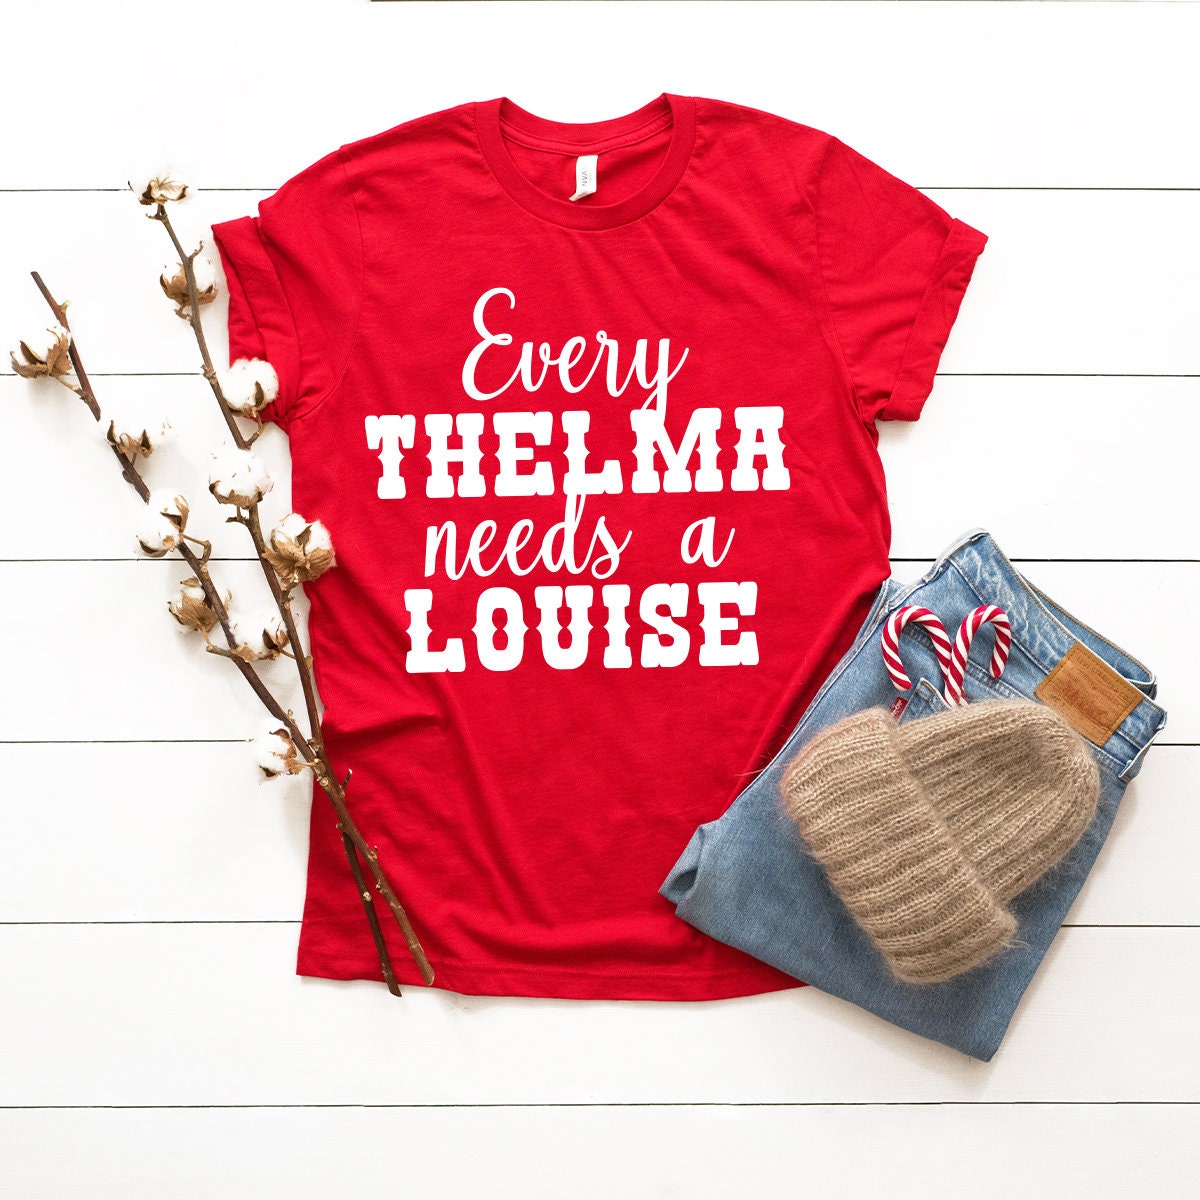 Funny Best Friend Shirt, Thelma and Louise Shirt, Funny T-Shirt, Sarcastic Tee, Funny Women Shirt, Sarcasm Quotes Tee, Funny Saying Shirt - Fastdeliverytees.com